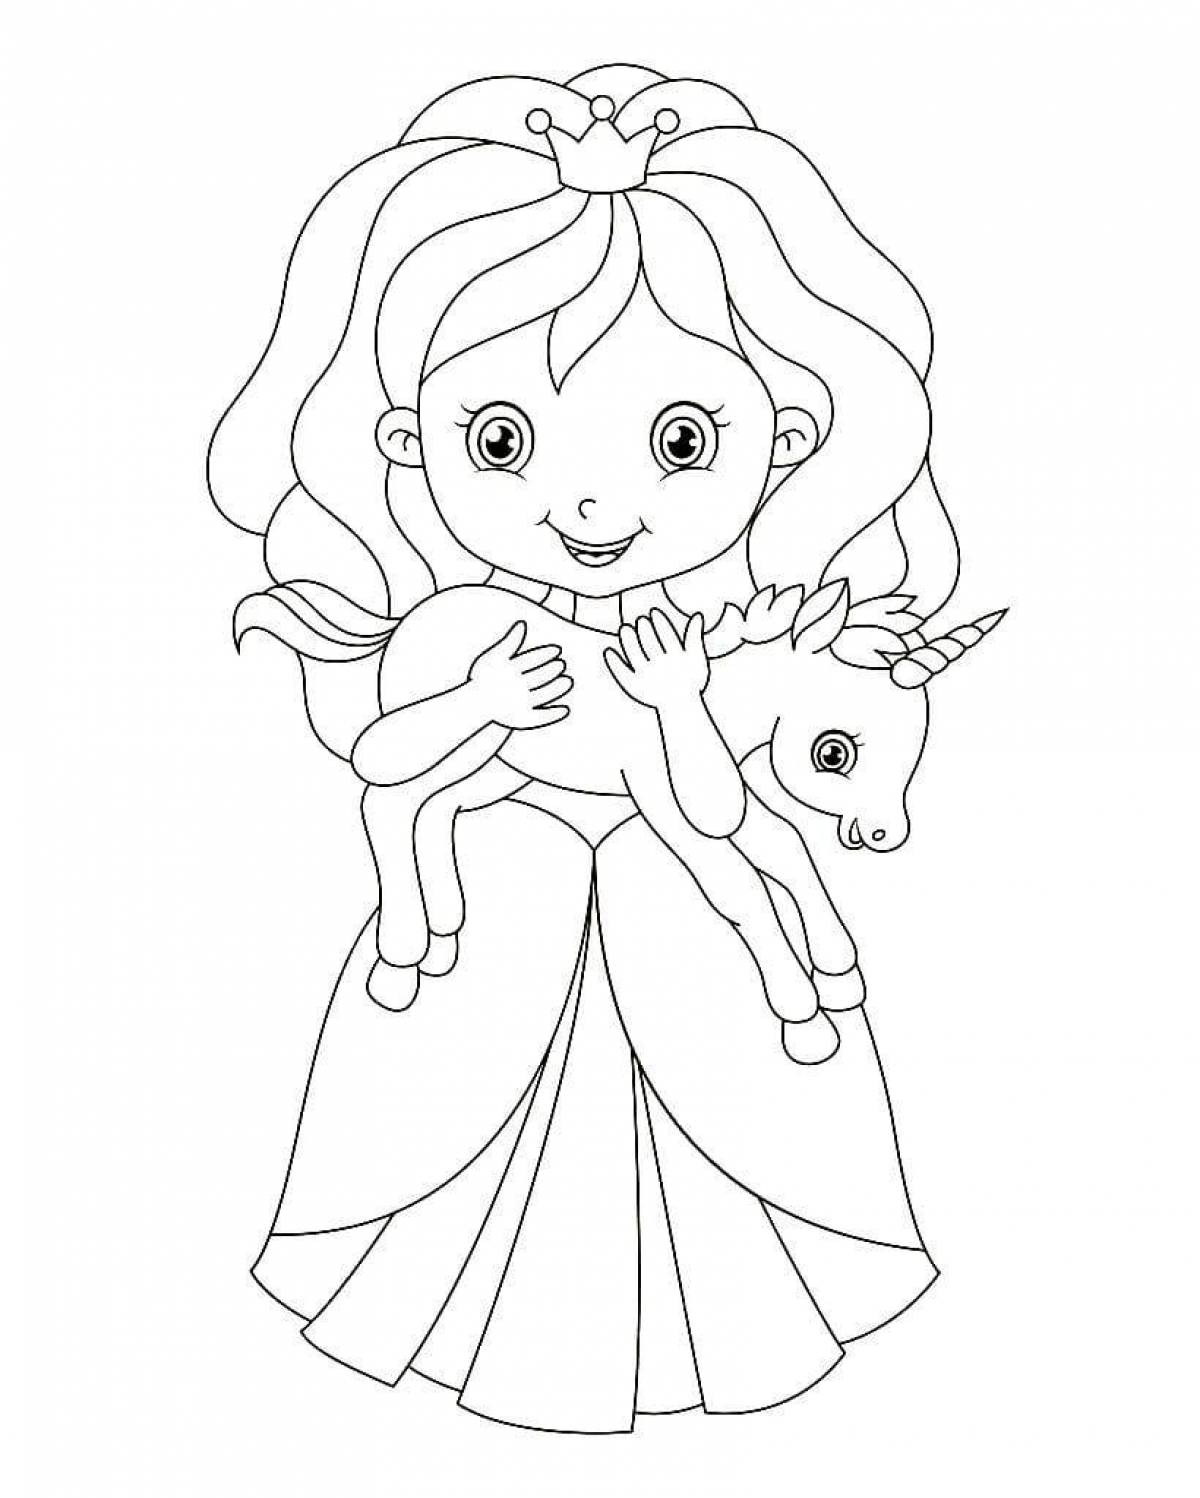 A fascinating princess coloring book for children 3-4 years old